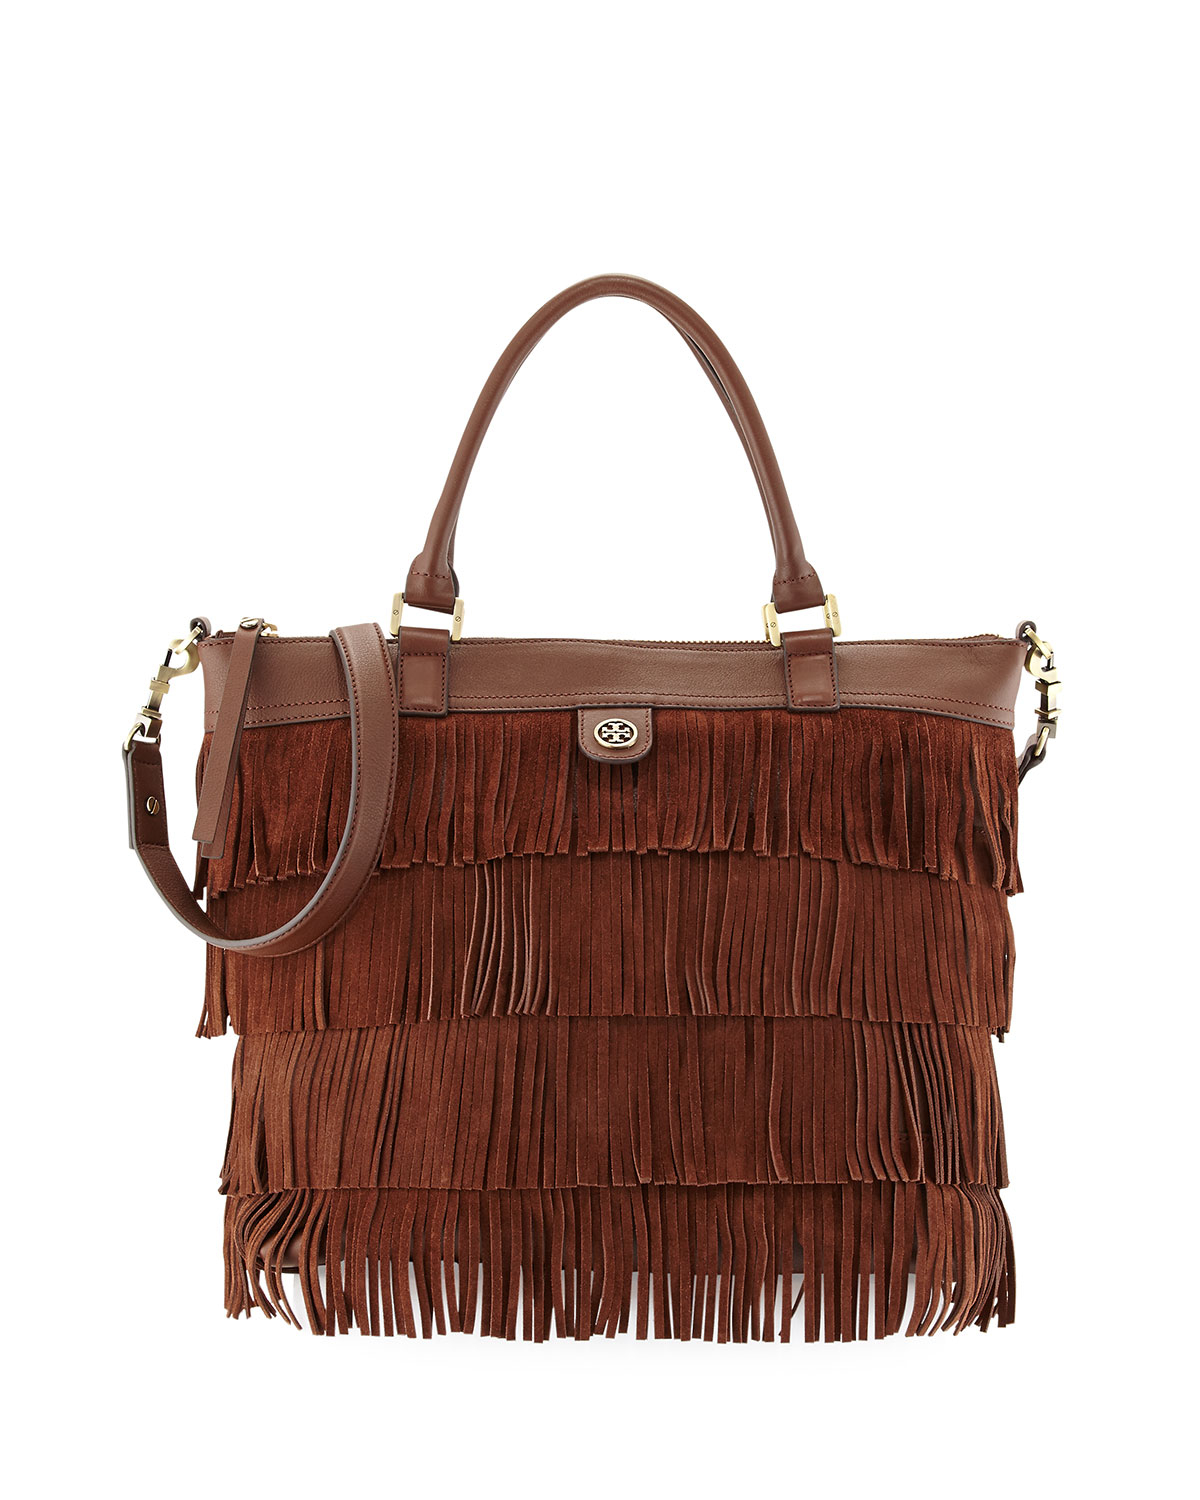 Tory Burch Leather Fringe Tote Bag Chocolate in Brown (CHOCOLATE) | Lyst